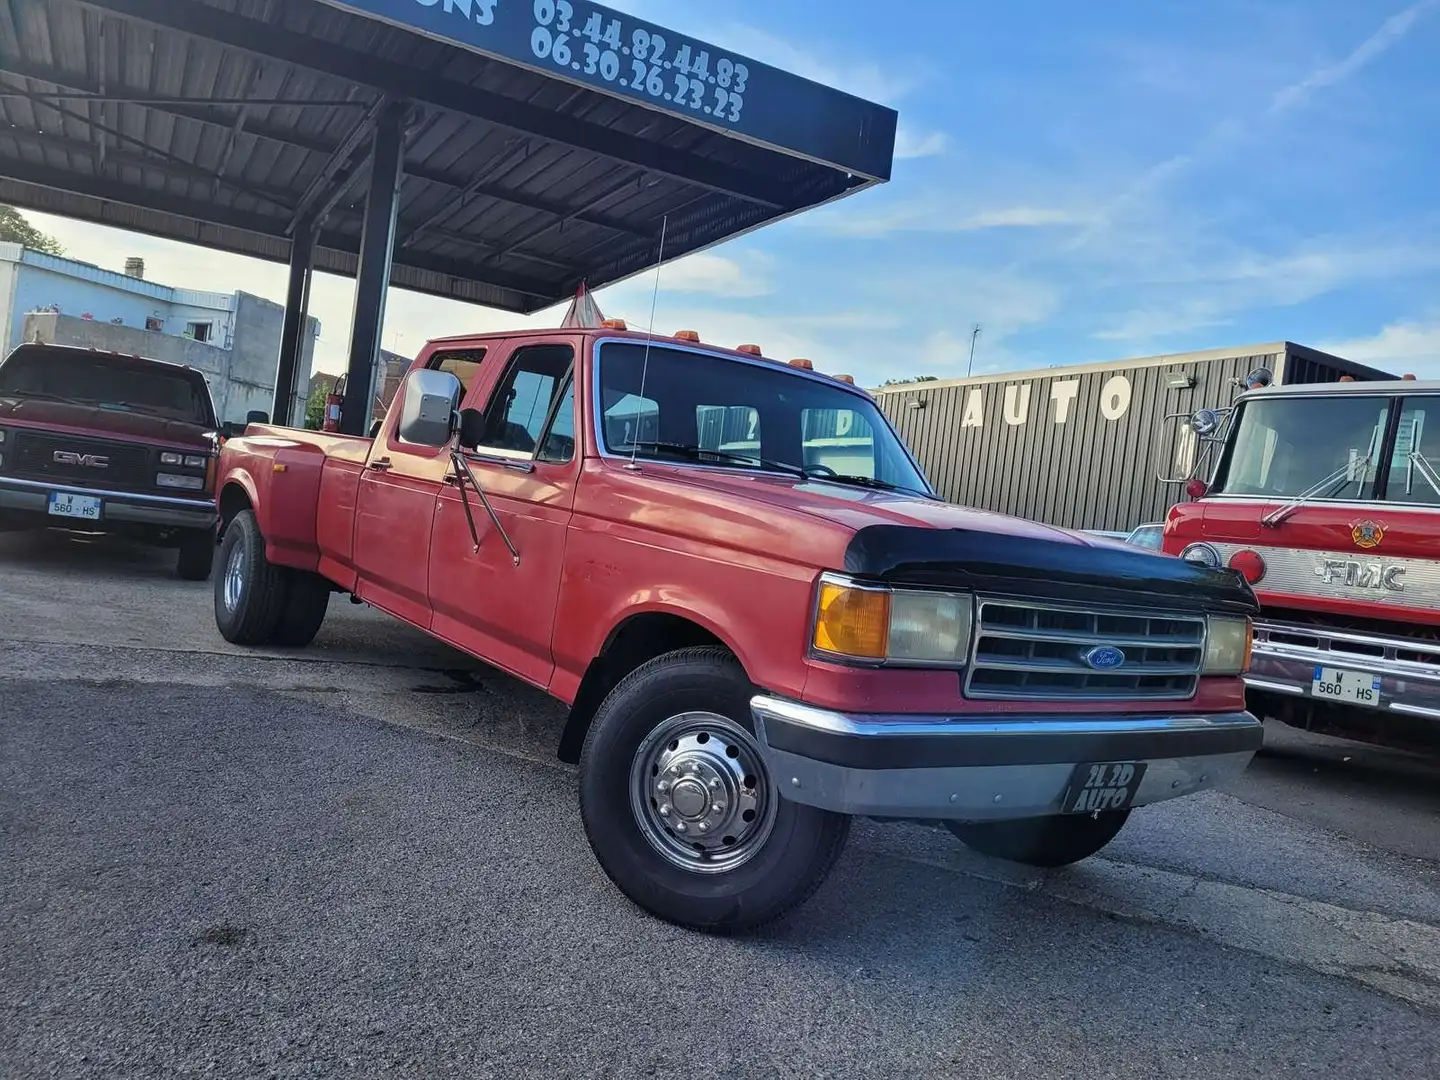 Ford F 350 FORD F350 CREW CAB 7.3 V8 Diesel dually Rot - 2